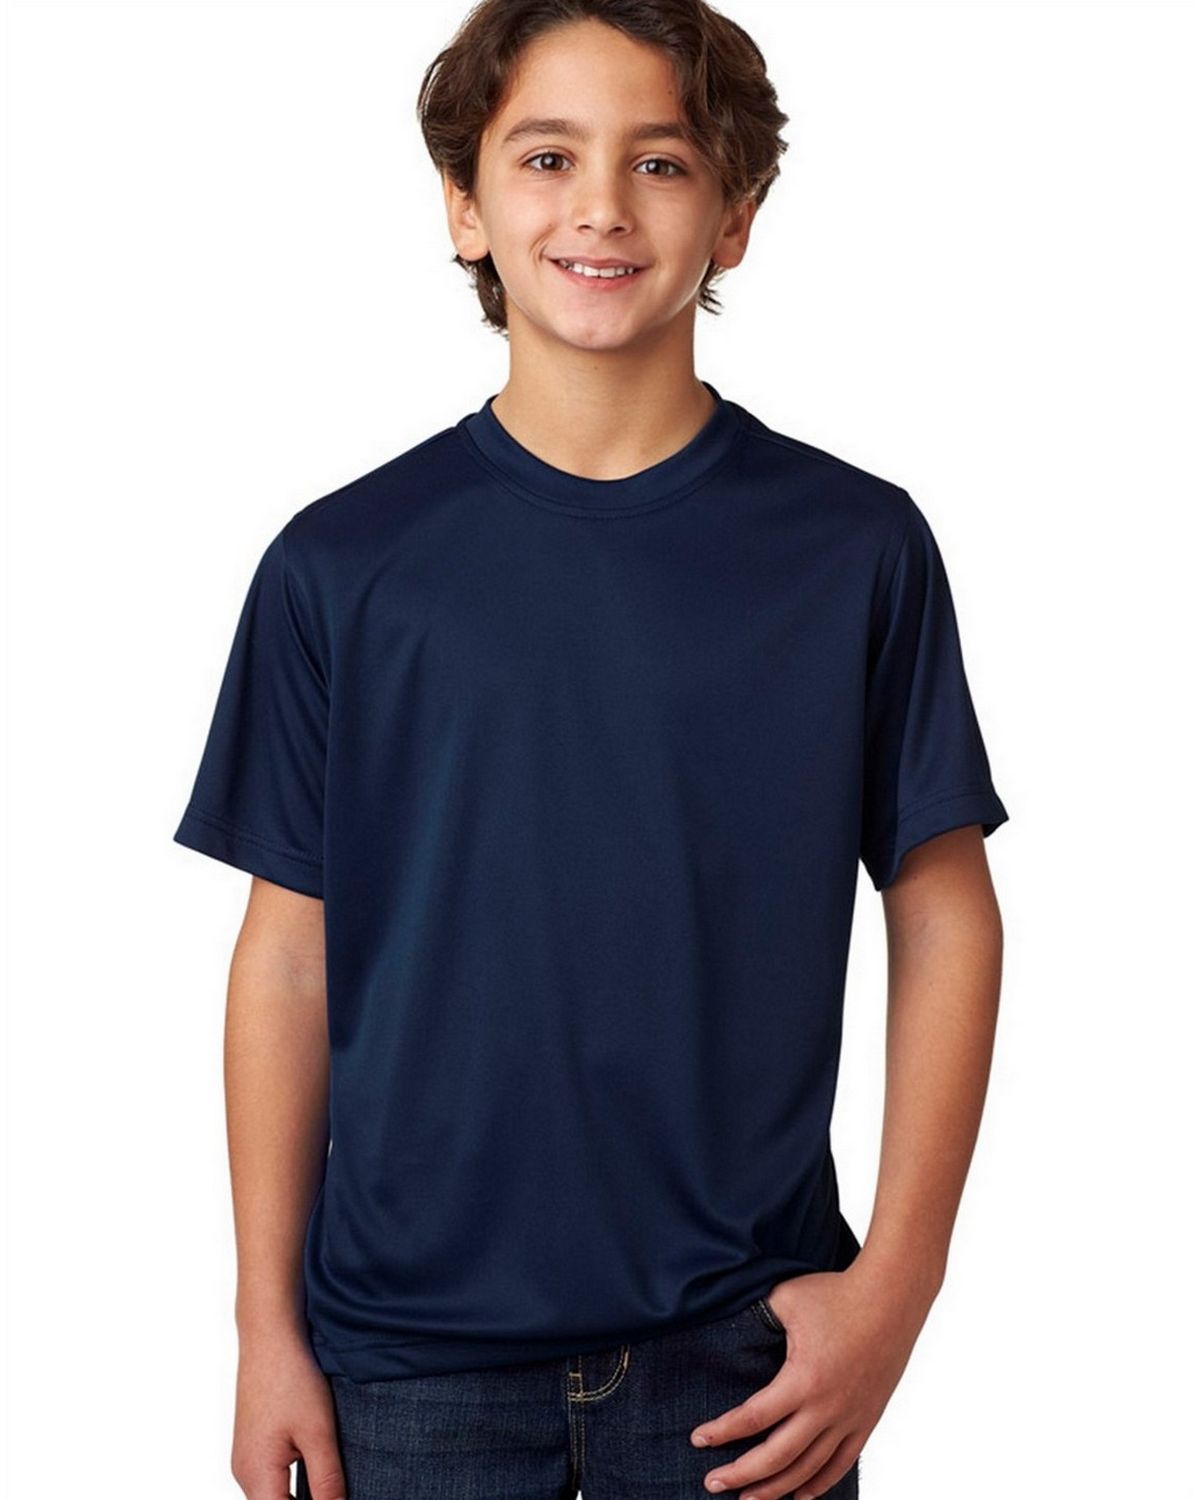 Ultraclub 8620Y Youth Cool & Dry Basic Performance Tee